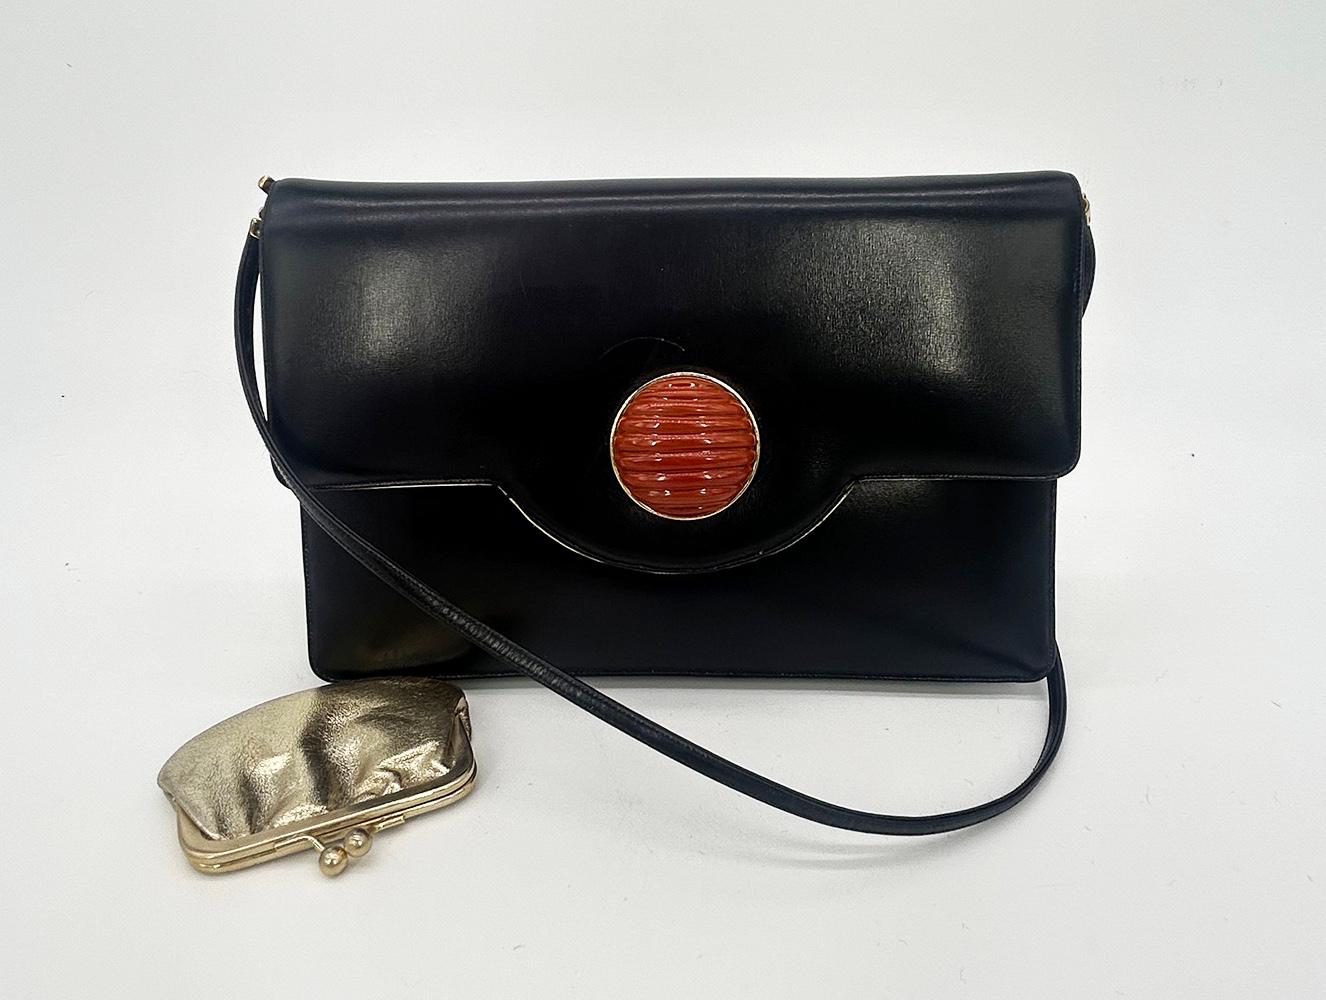 Vintage Judith Leiber Black Box Calf Leather Clutch For Sale 12